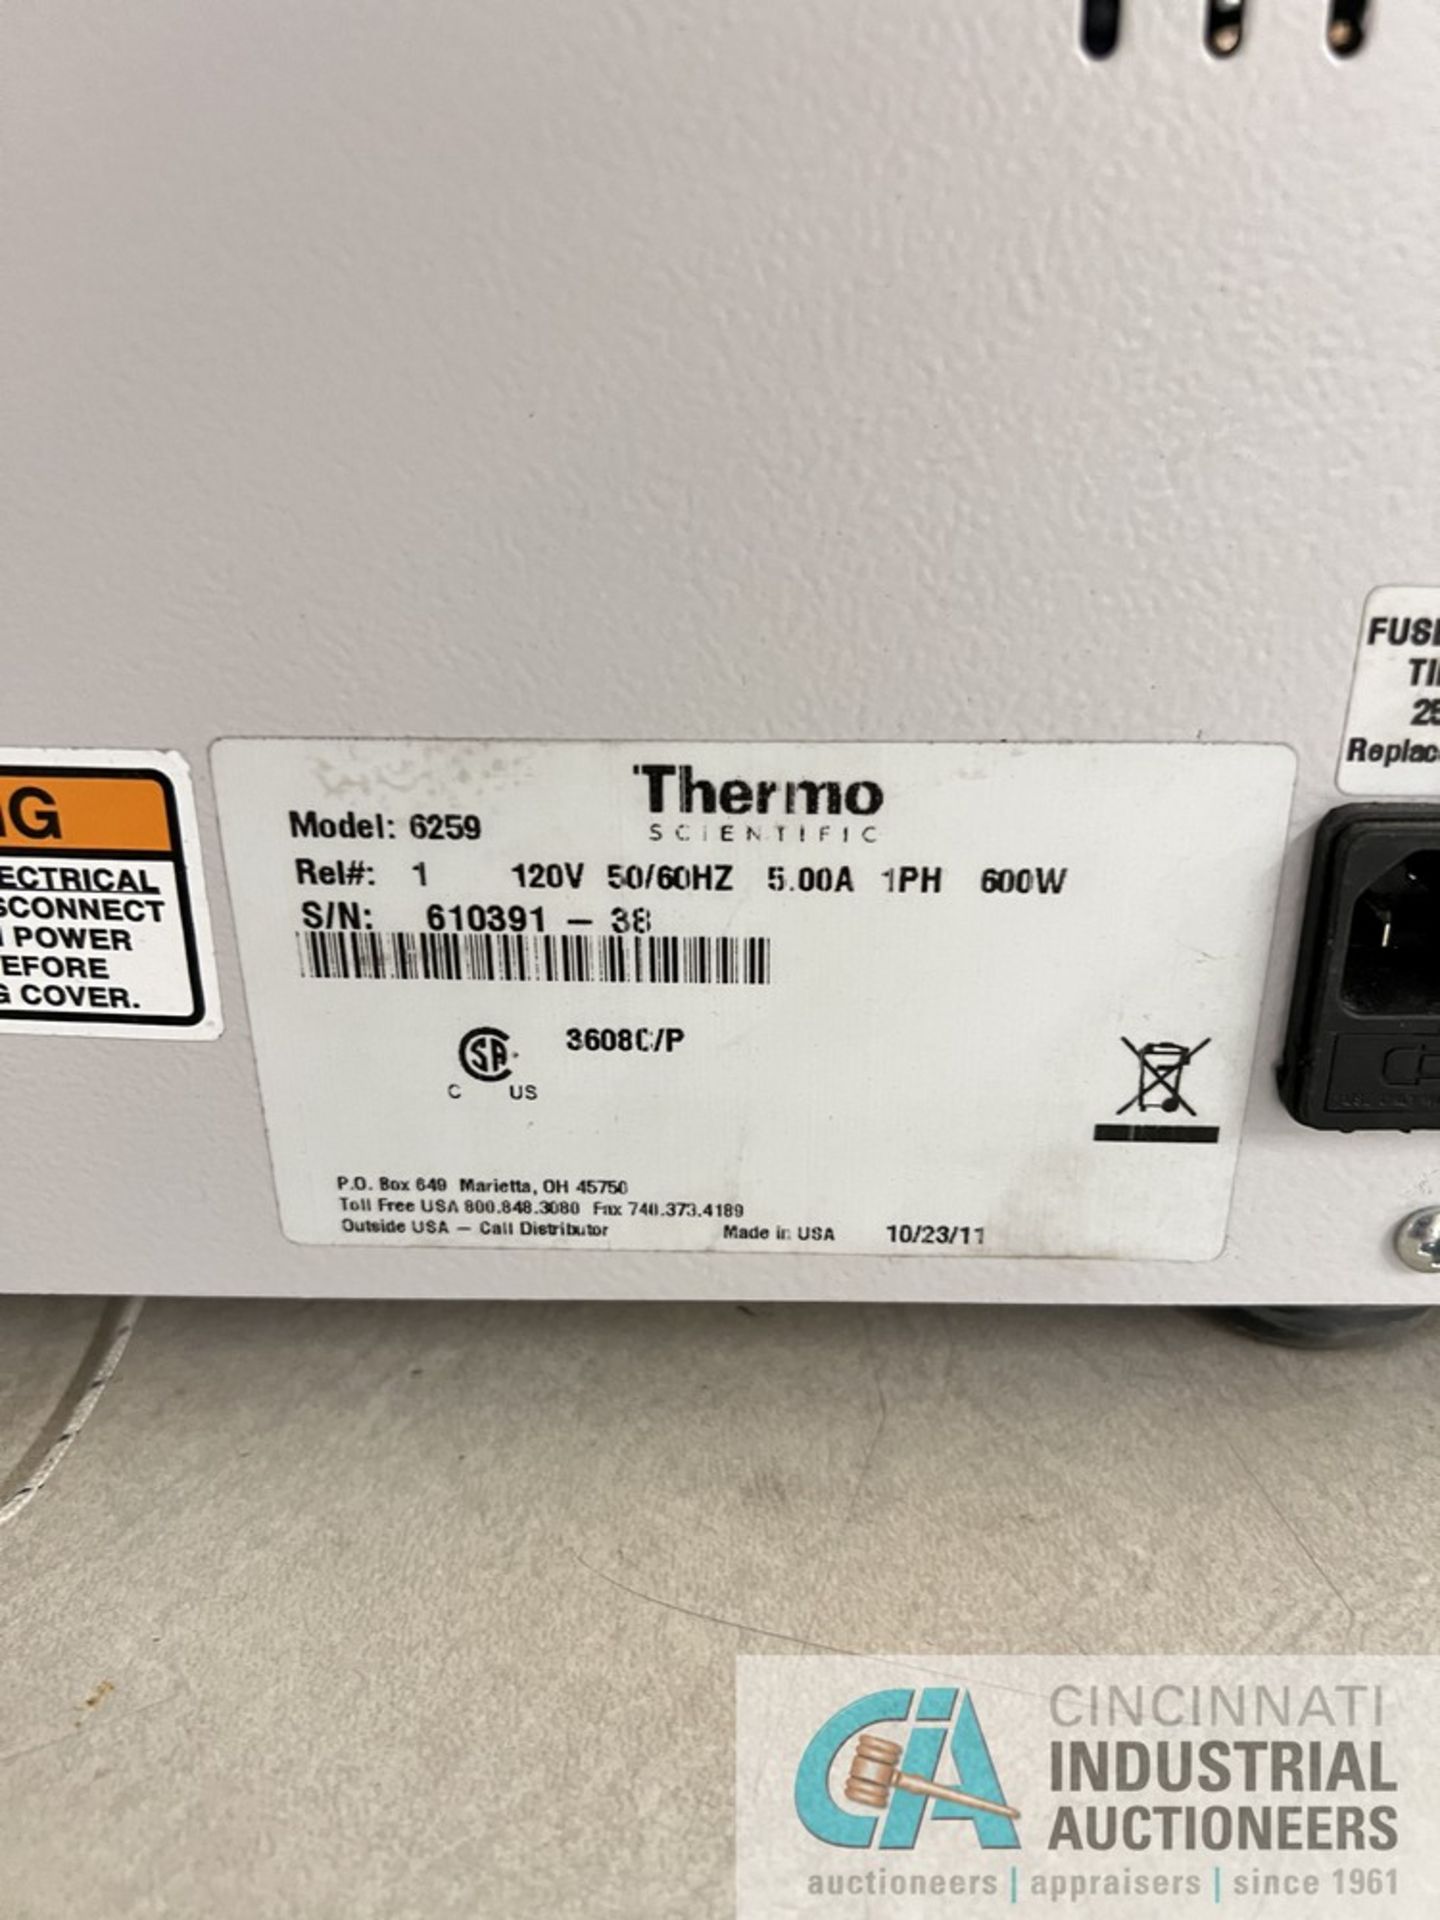 THERMO SCIENTIFIC MODEL 6259 VACUUM OVEN; S/N 610391-38 (USED) (WAREHOUSE) - Image 6 of 6